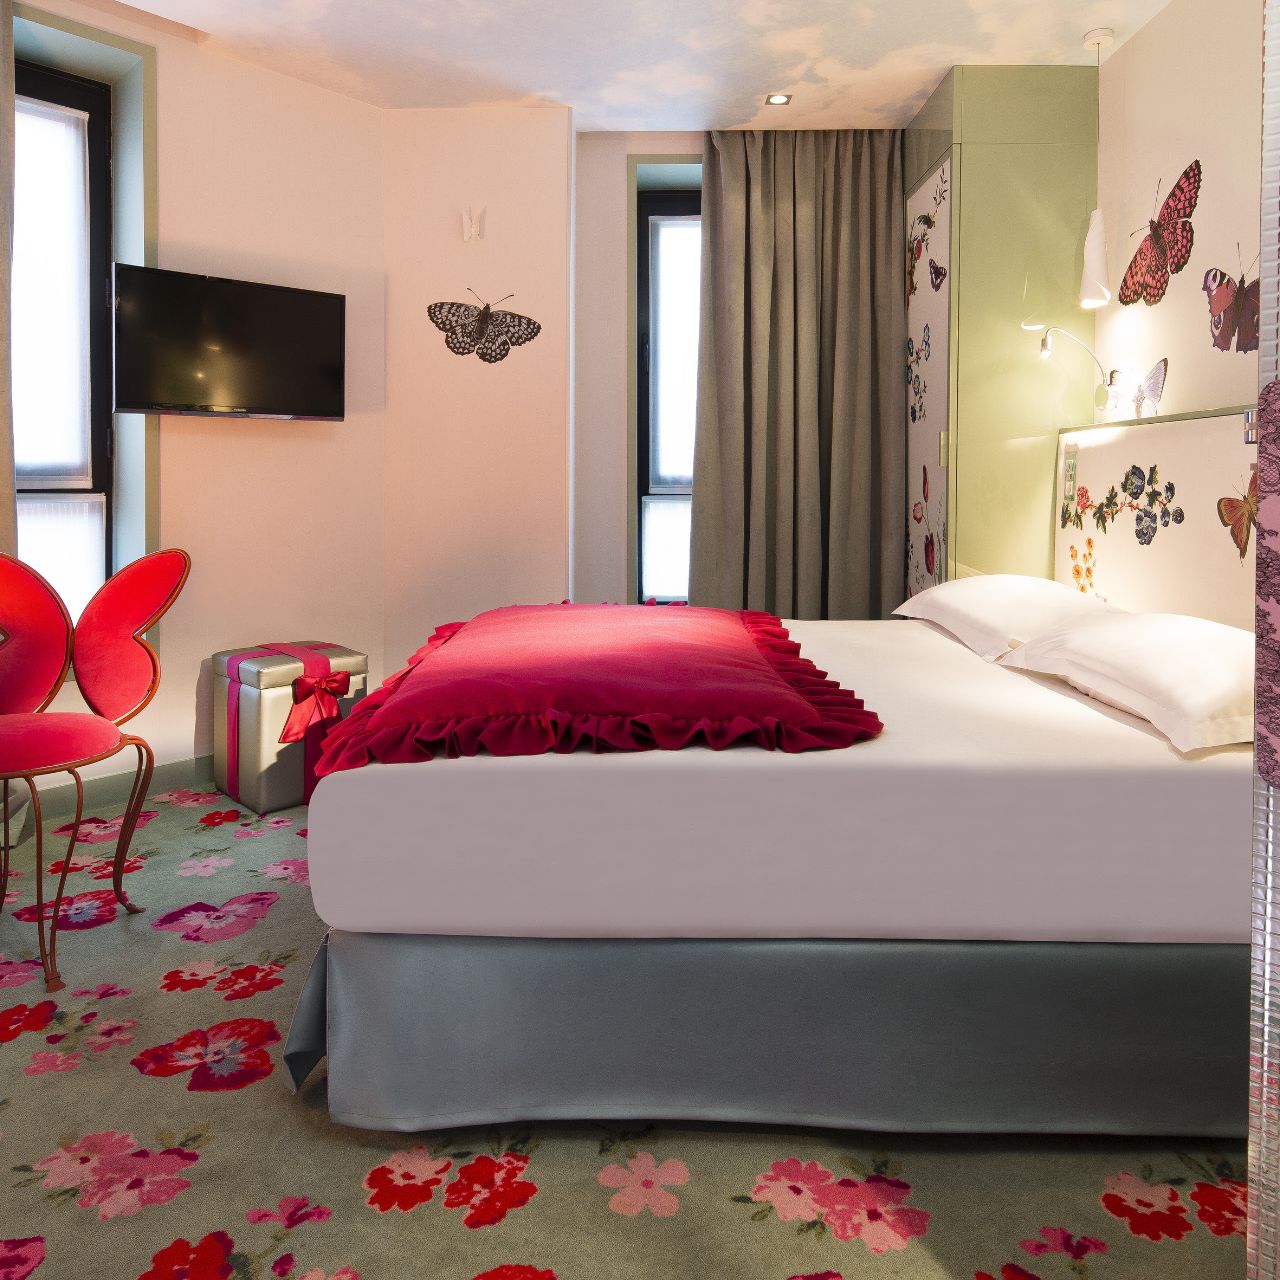 Hotel Vice Versa - Paris - Great prices at HOTEL INFO